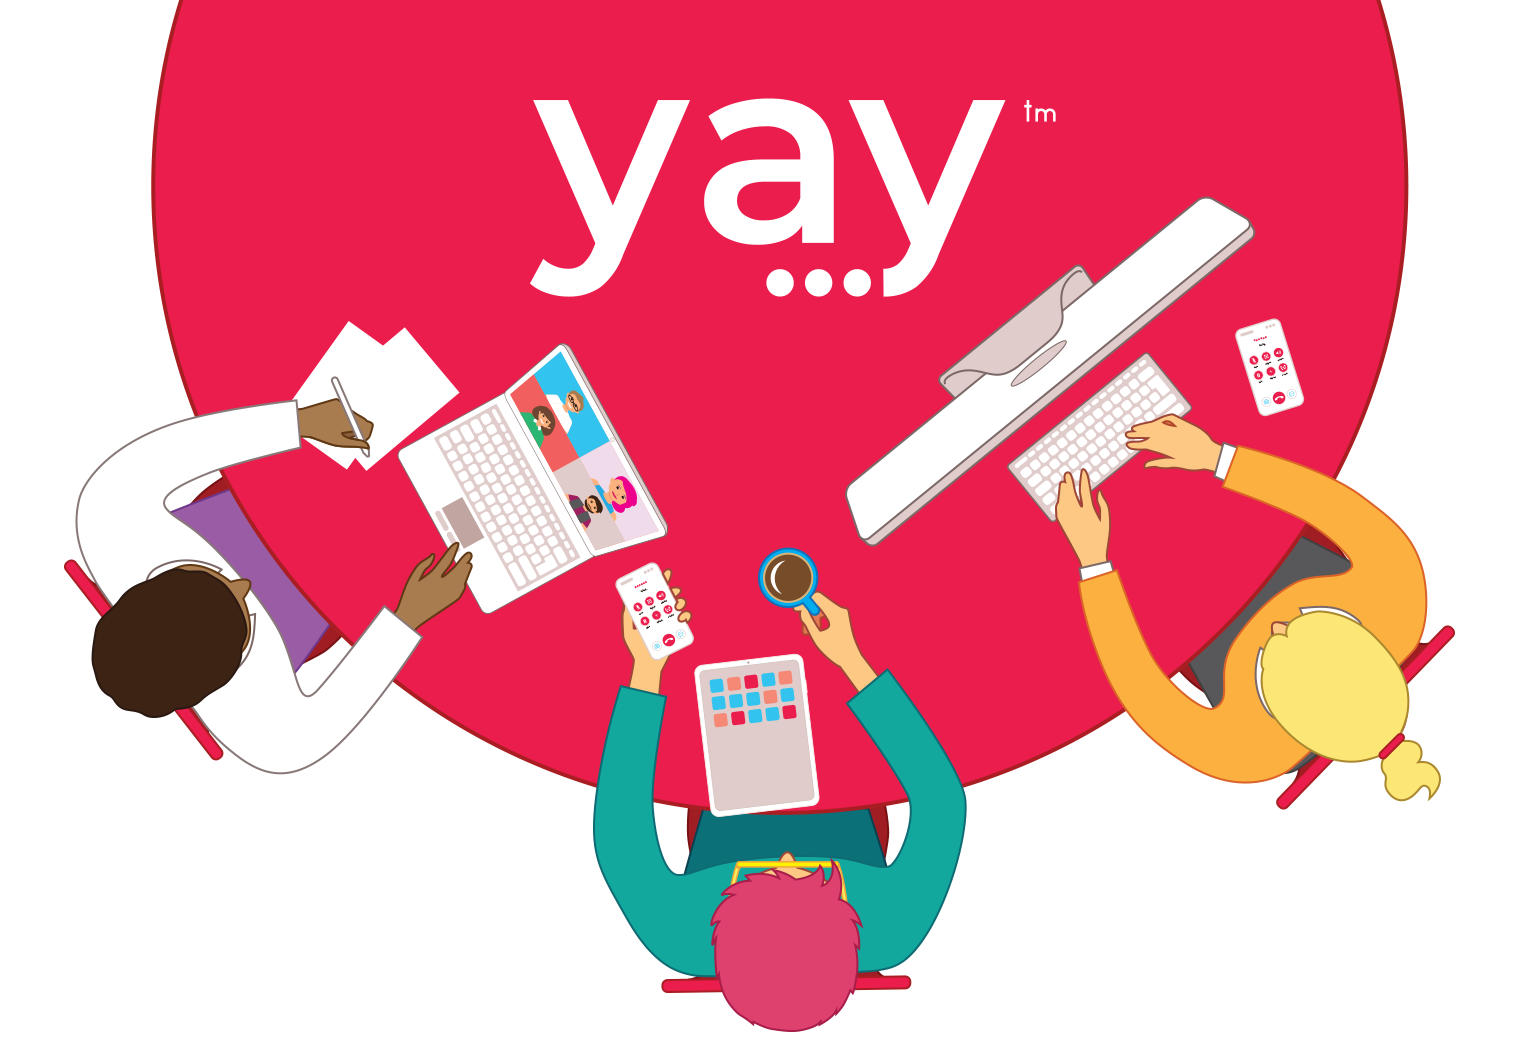 The Yay.com Free VoIP Trial